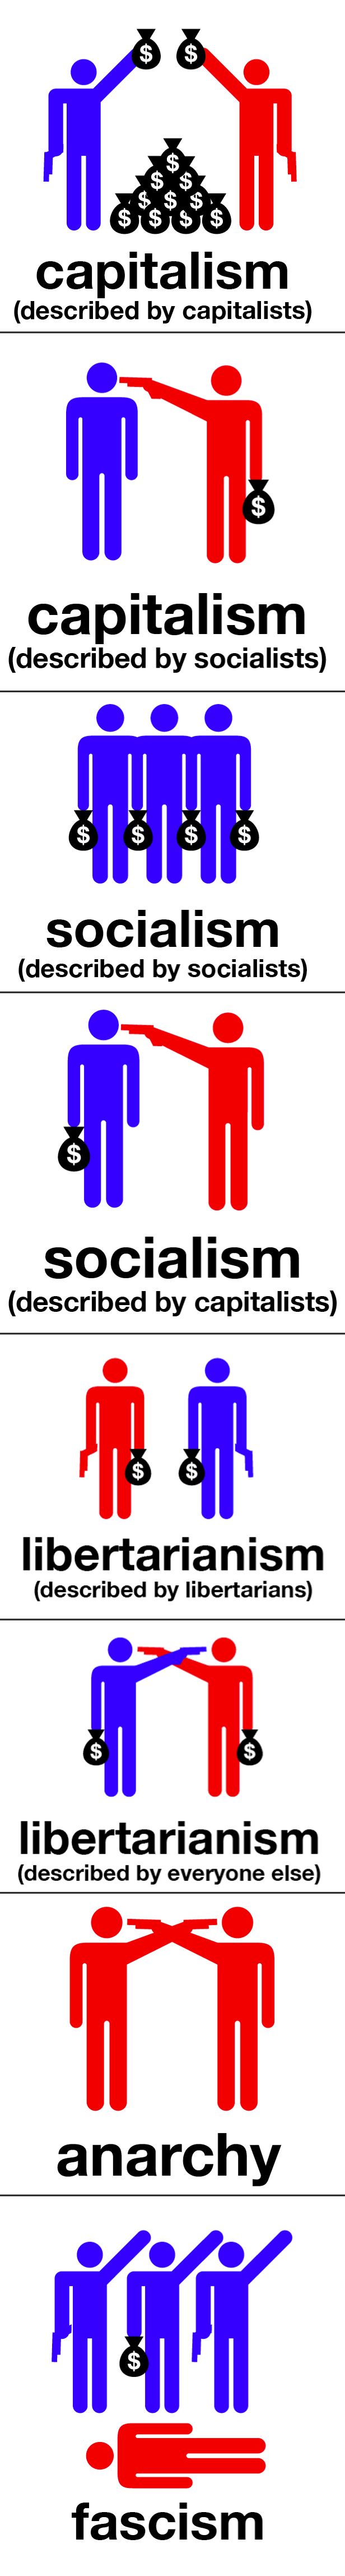 Capitalism, Socialism, Libertarianism, Anarchy and Fascism explained (8 pics)